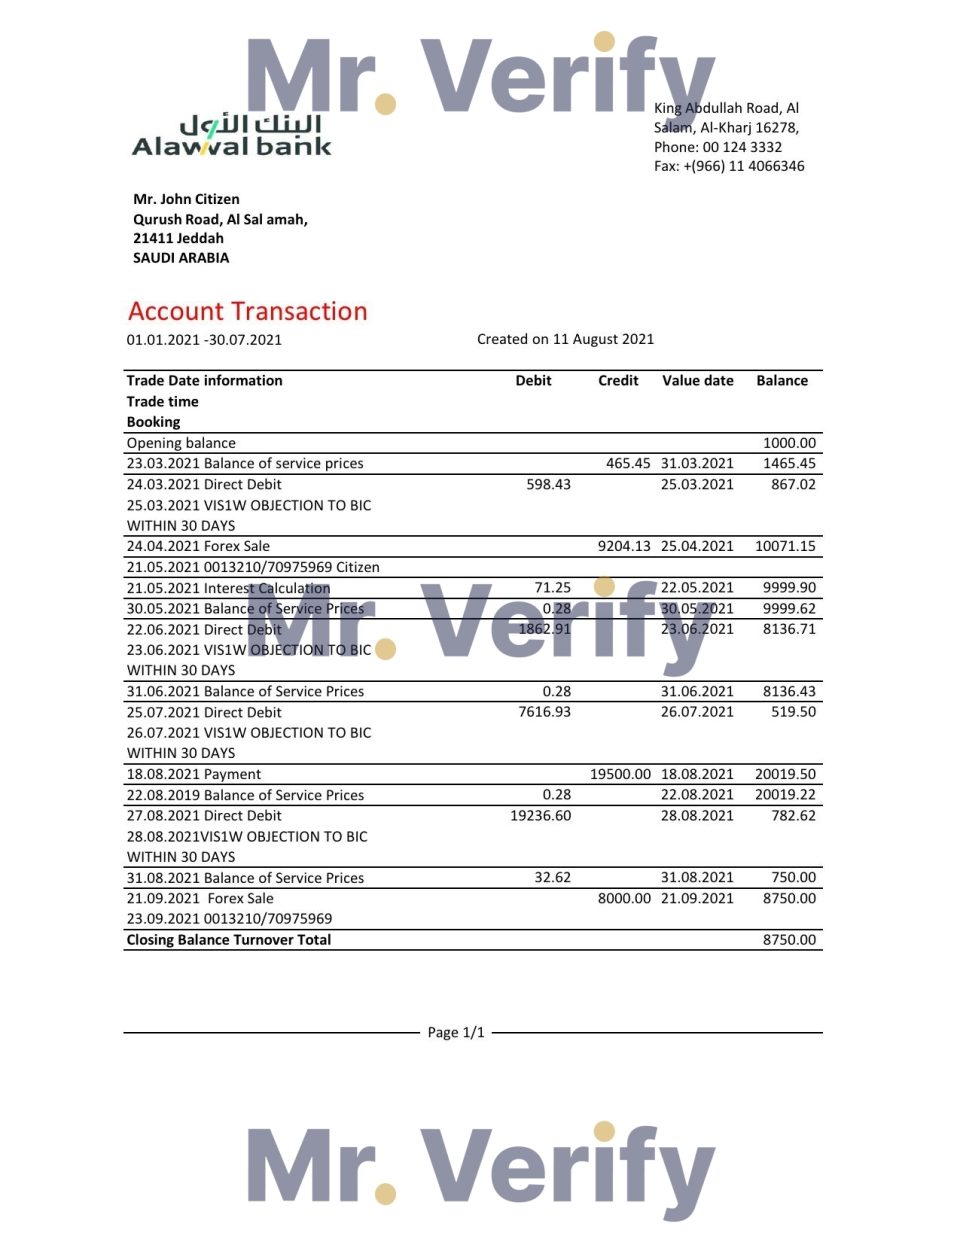 Saudi Arabia Alawwal Bank statement easy to fill template in .xls and .pdf file format